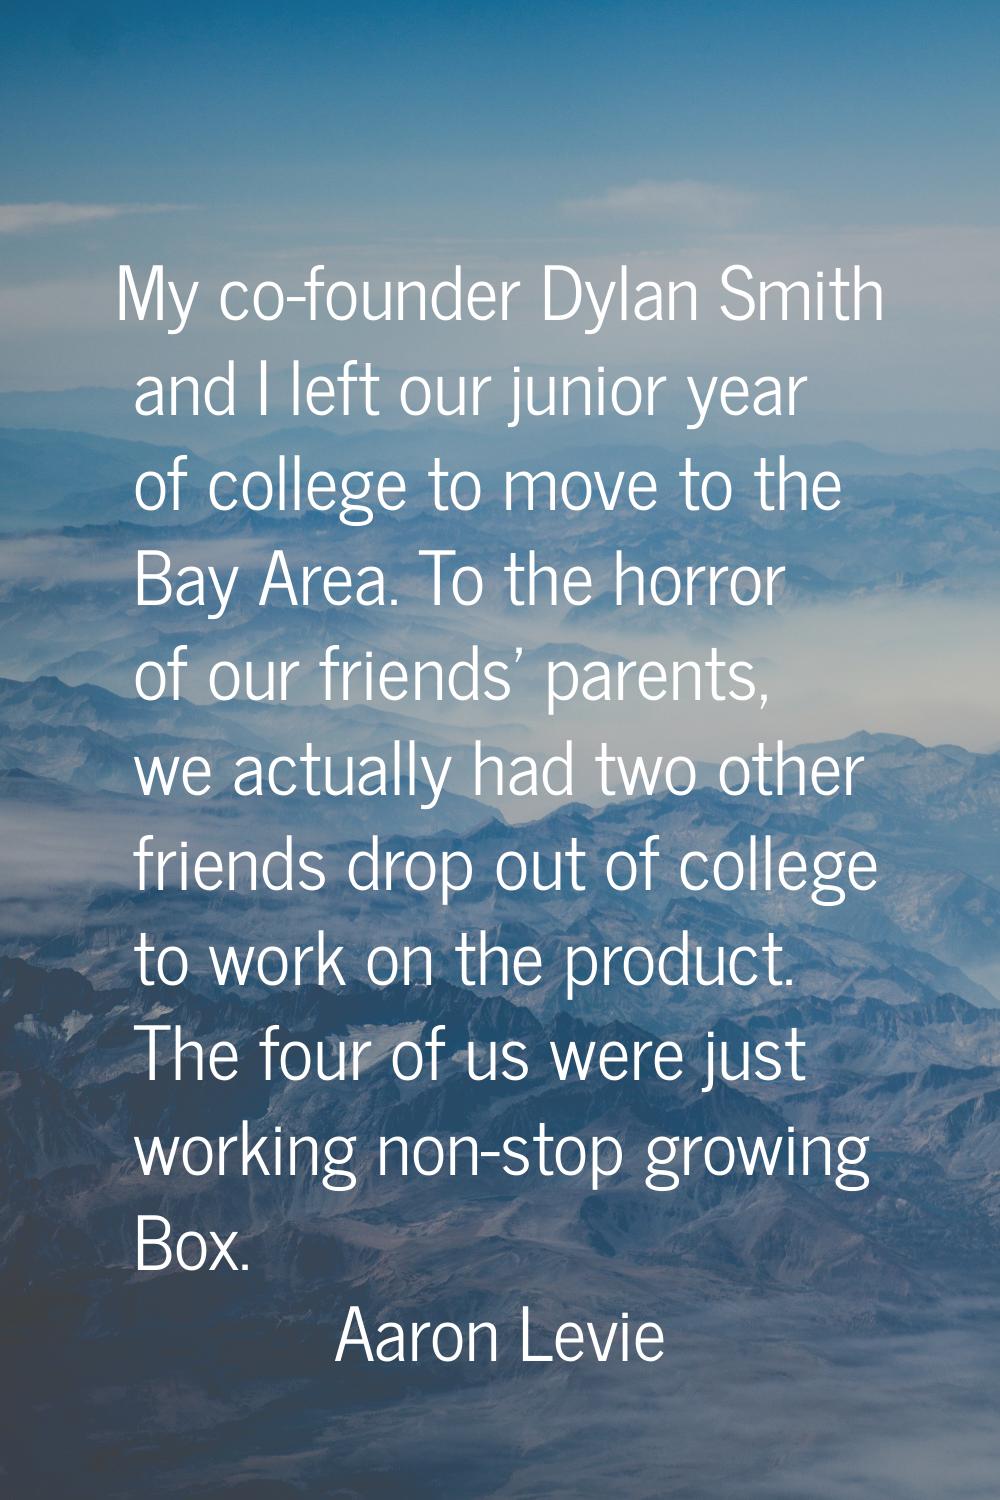 My co-founder Dylan Smith and I left our junior year of college to move to the Bay Area. To the hor